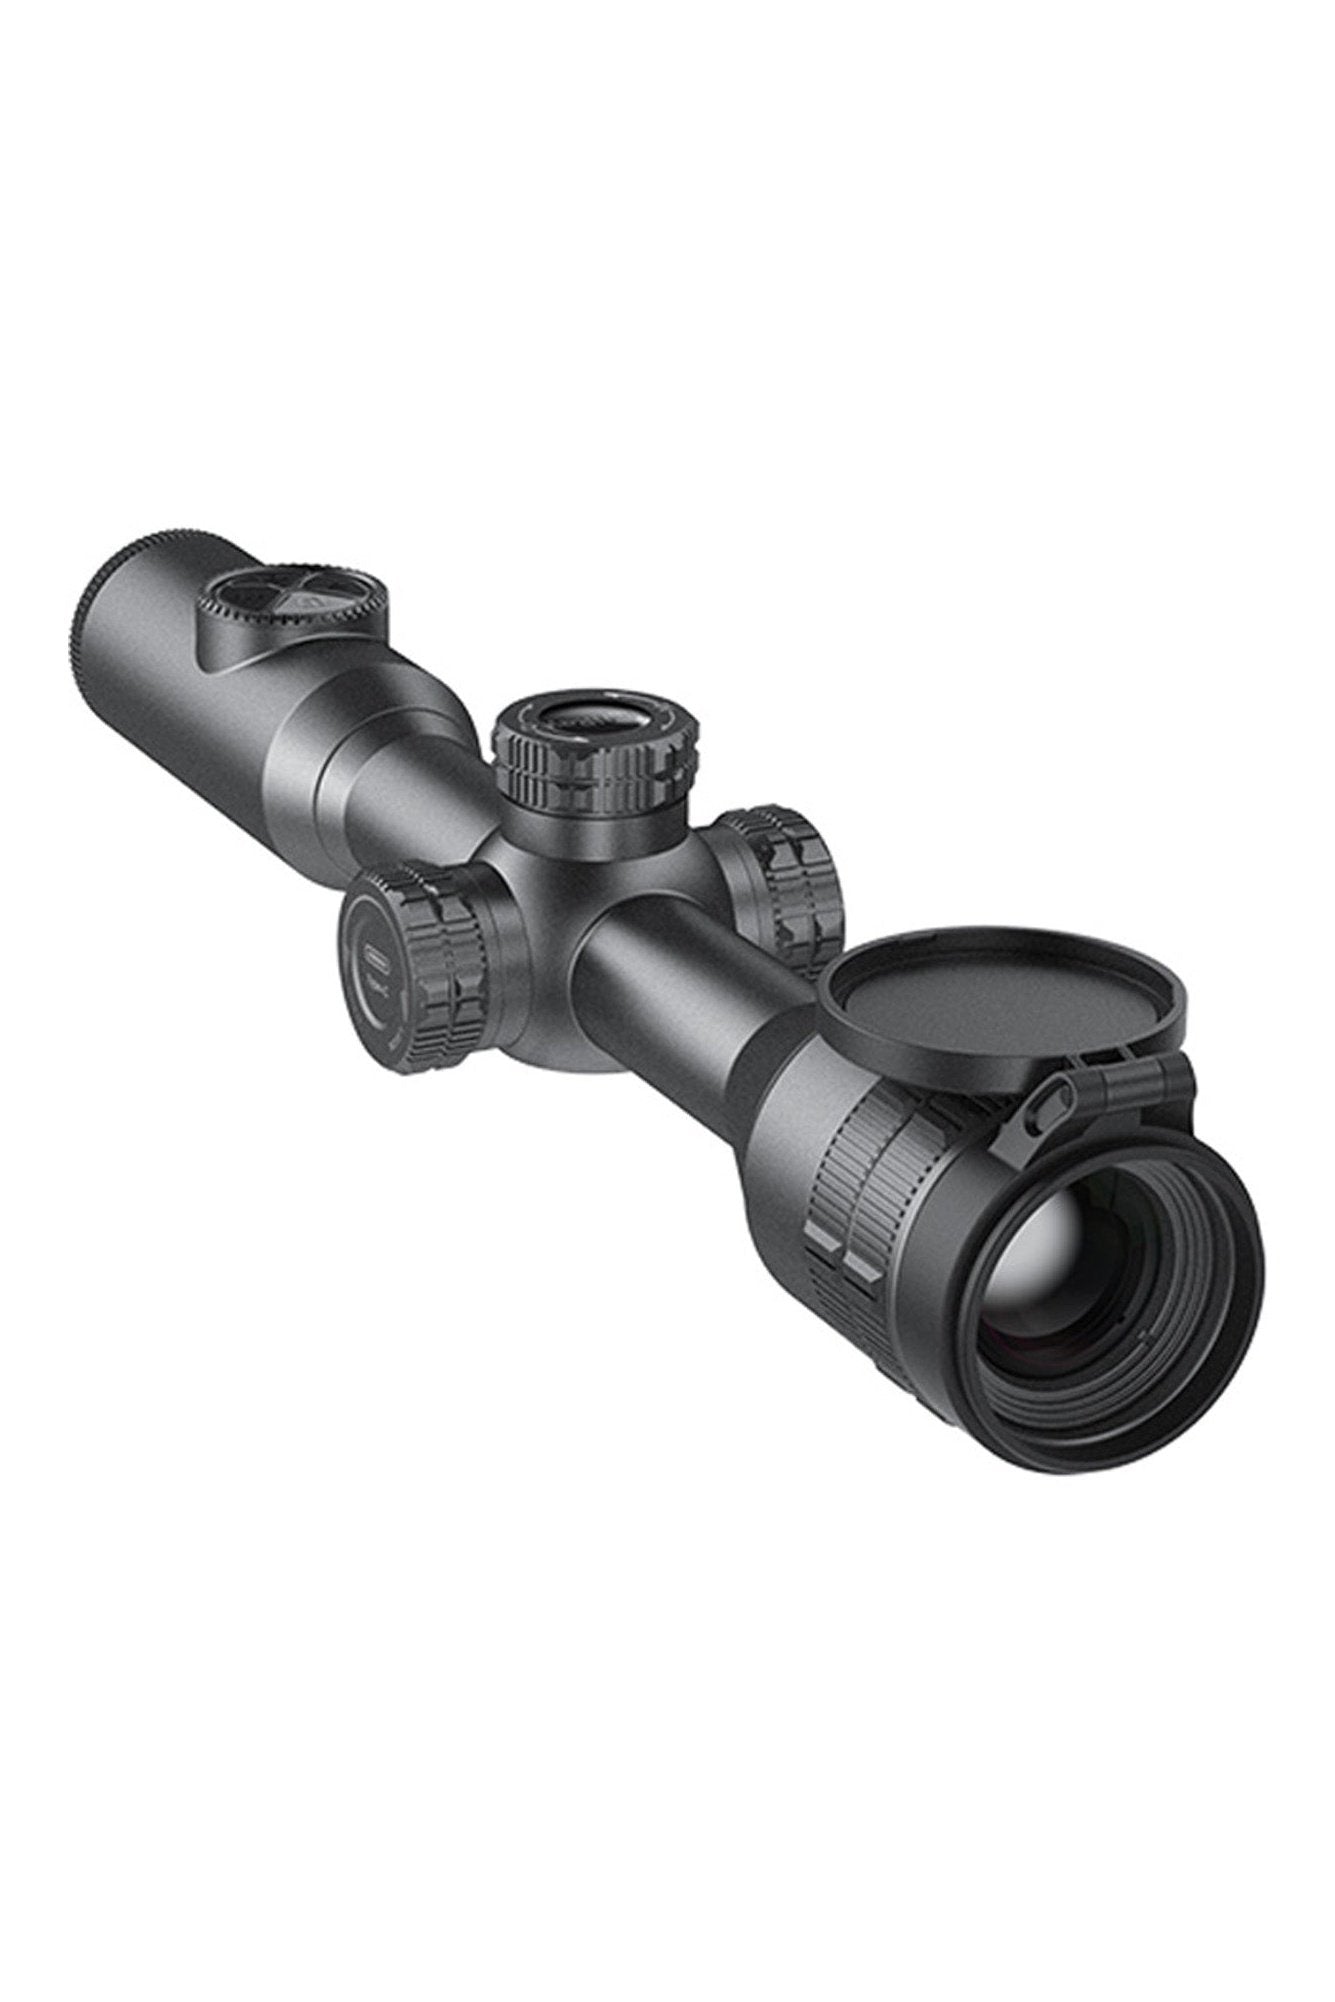 InfiRay TL50 Thermal Scope